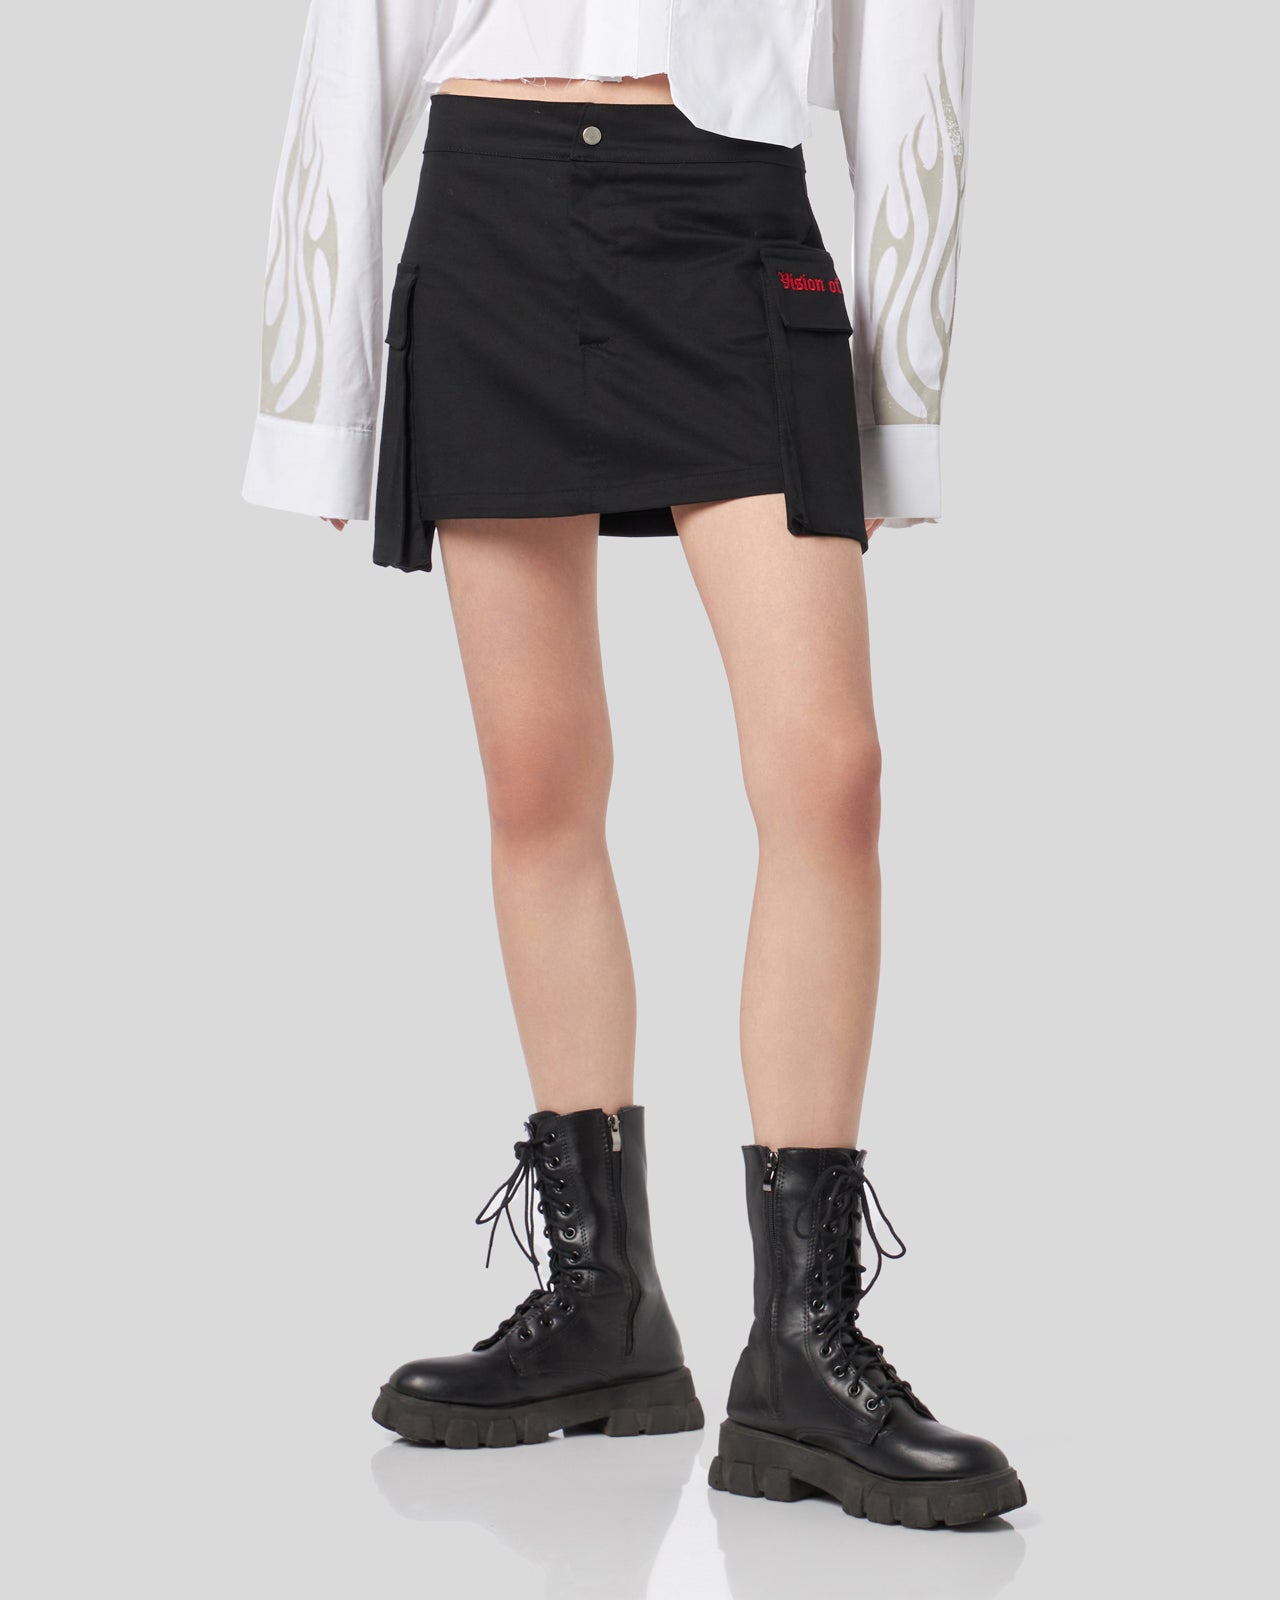 BLACK CARGO SKIRT WITH EMBROIDERED GOTIC LOGO